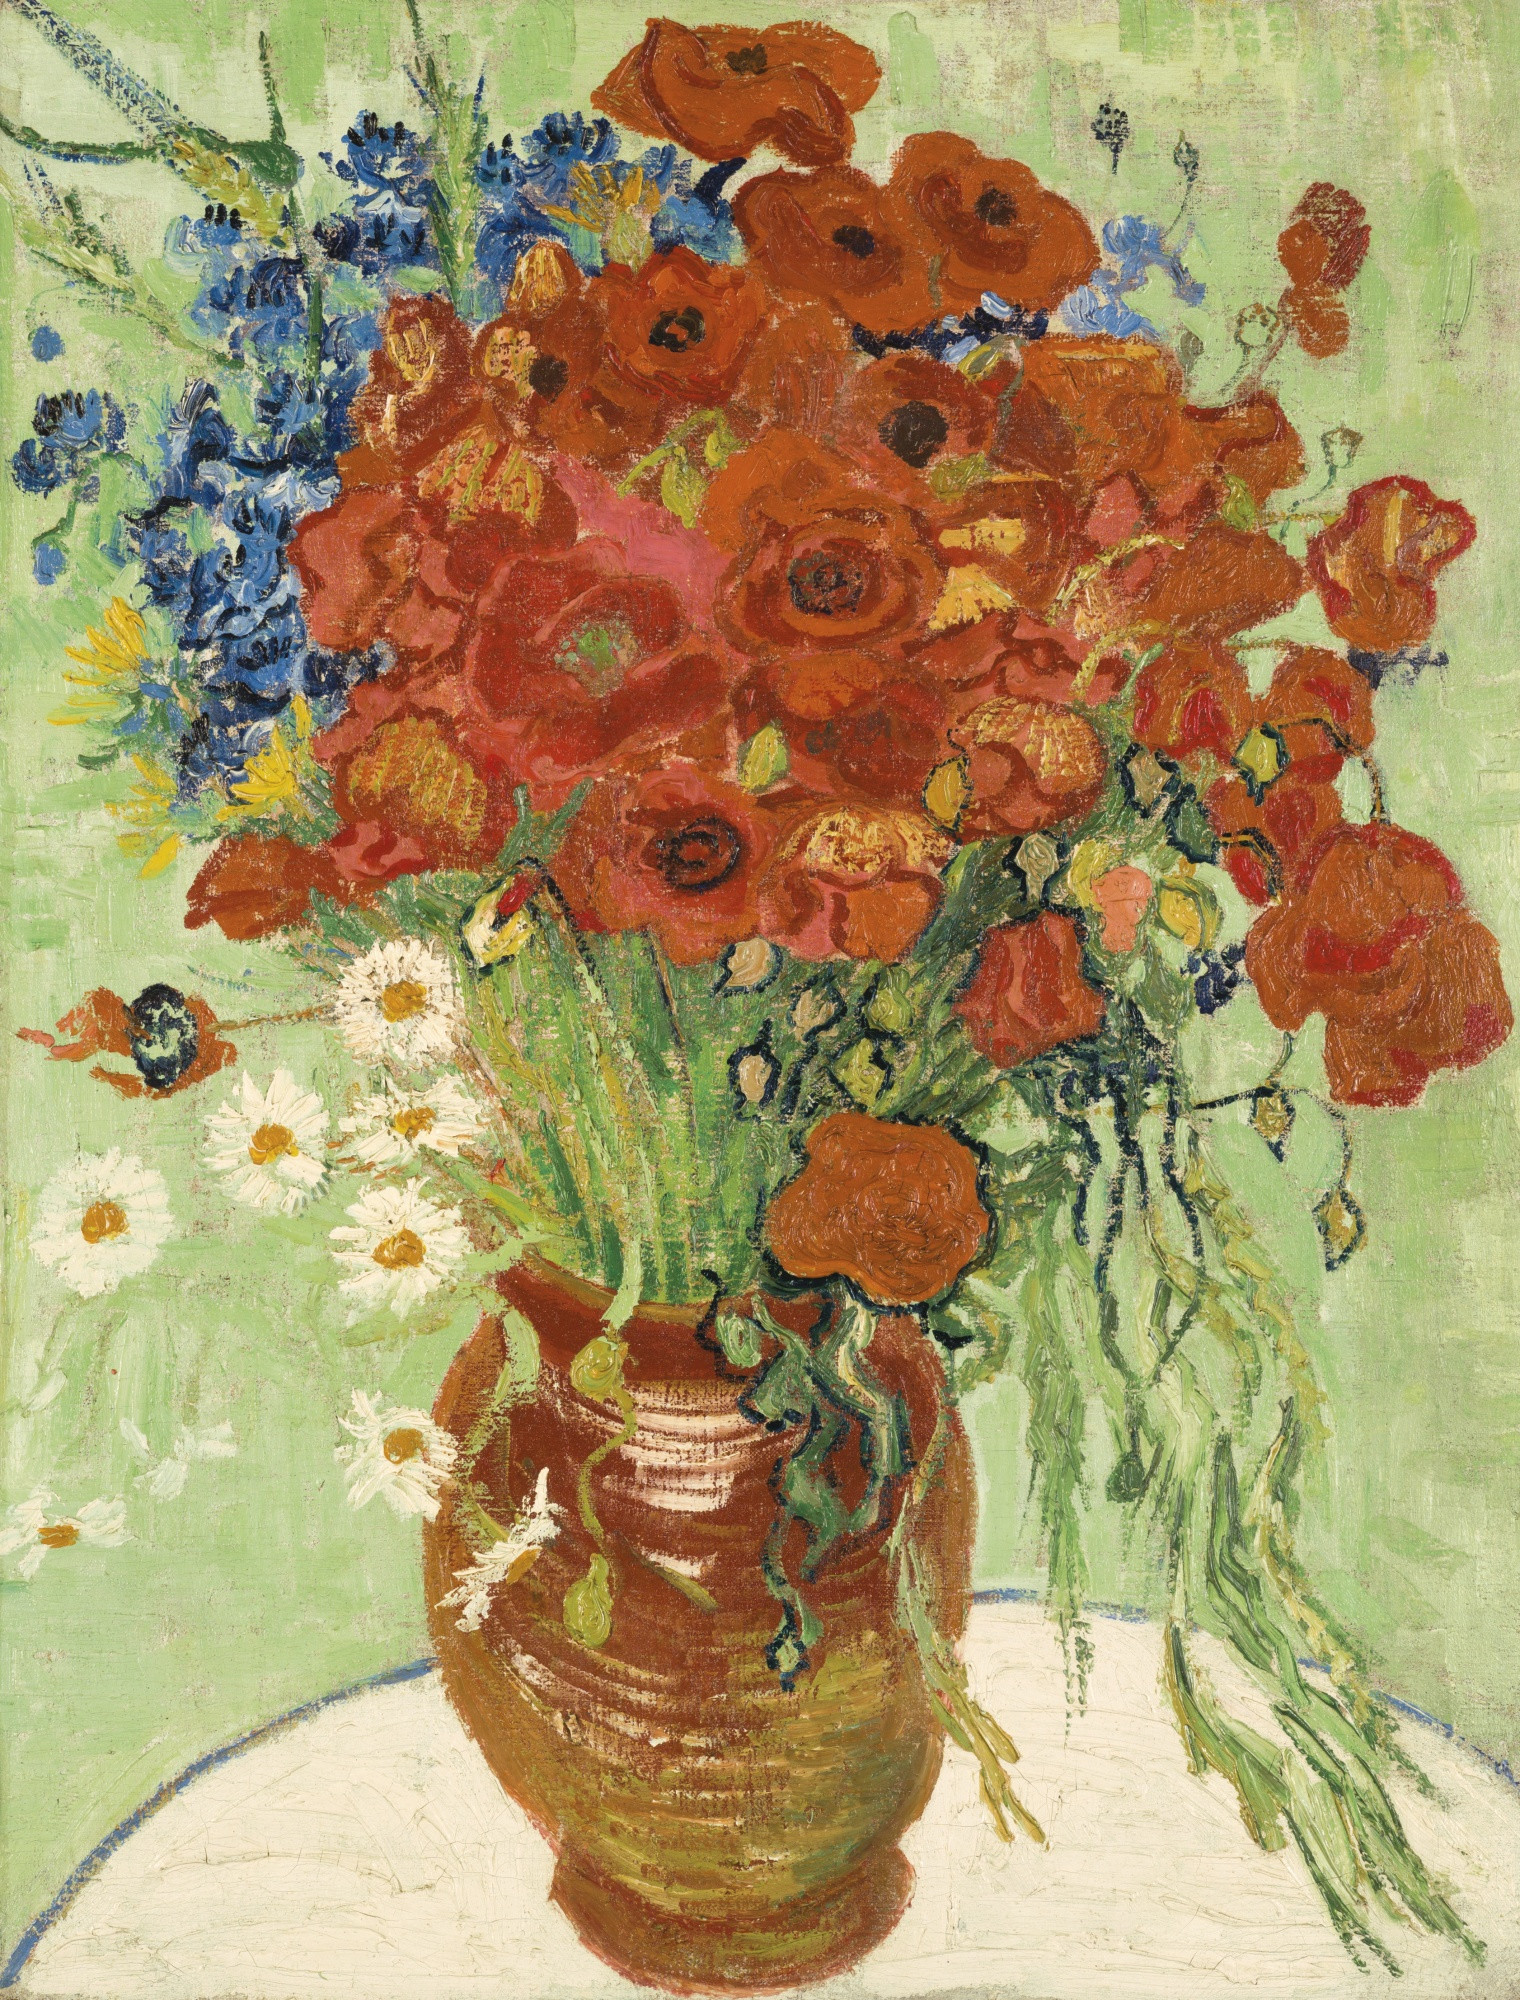 16 attractive Still Life Vase Of Flowers 2024 free download still life vase of flowers of souborvincent van gogh vase with cornflowers and poppies f280 intended for souborvincent van gogh vase with cornflowers and poppies f280 jh2032